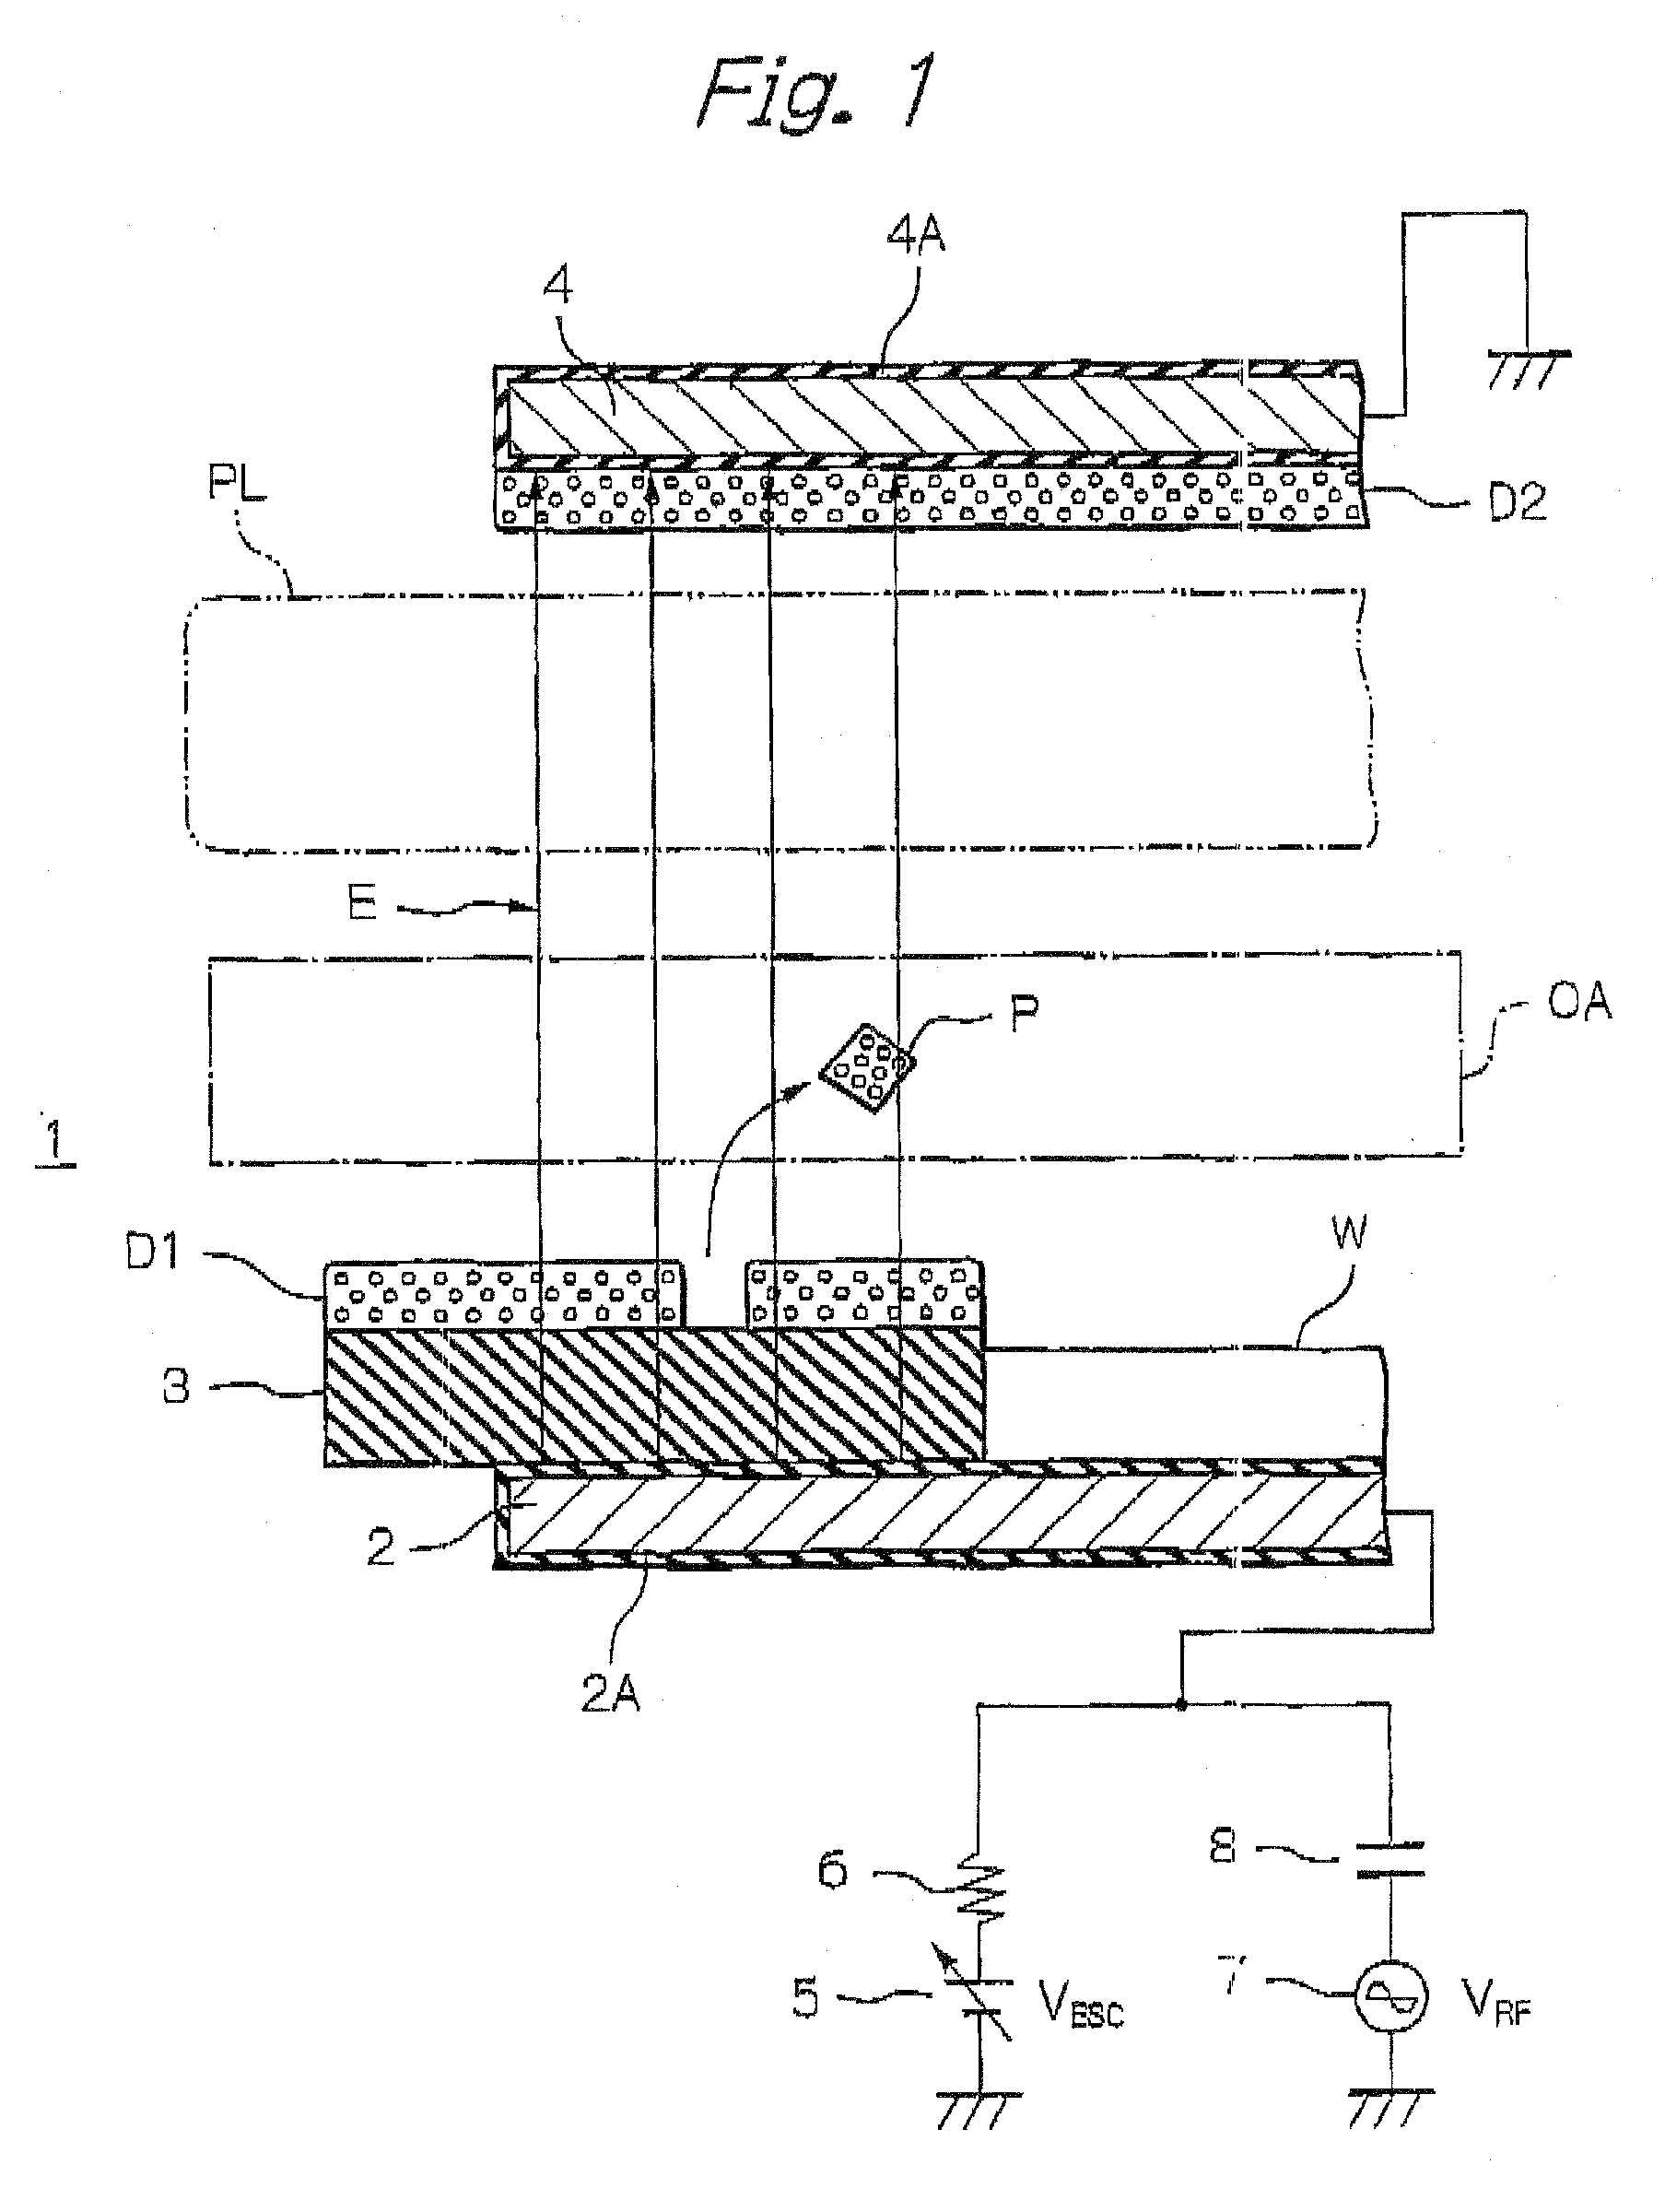 Object-processing apparatus controlling production of particles in electric field or magnetic field